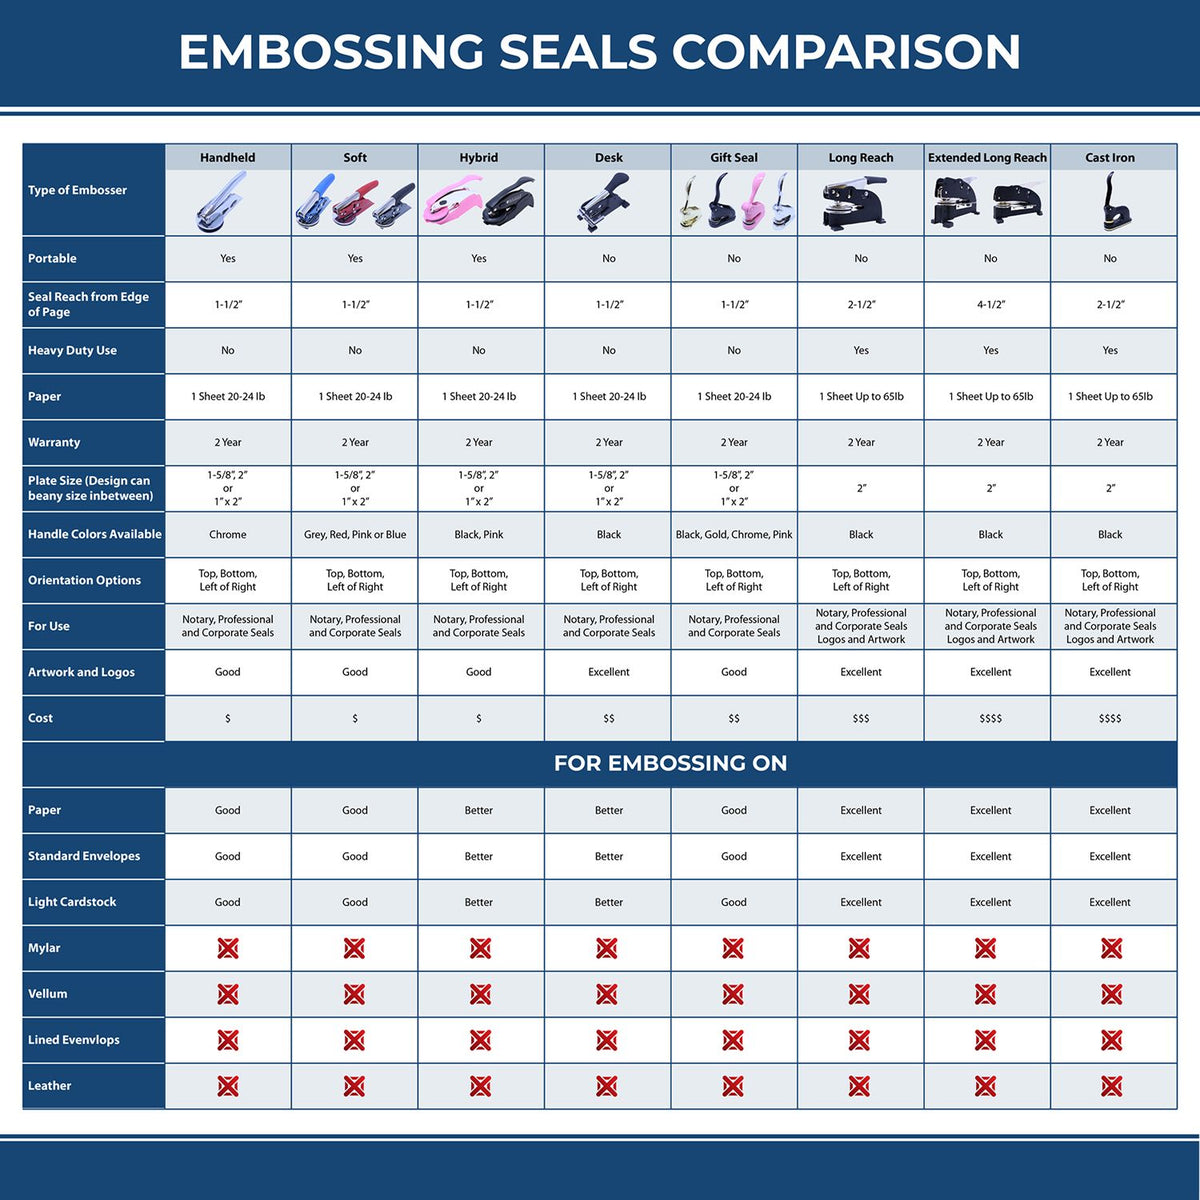 A comparison chart for the different types of mount models available for the Heavy Duty Cast Iron Delaware Engineer Seal Embosser.